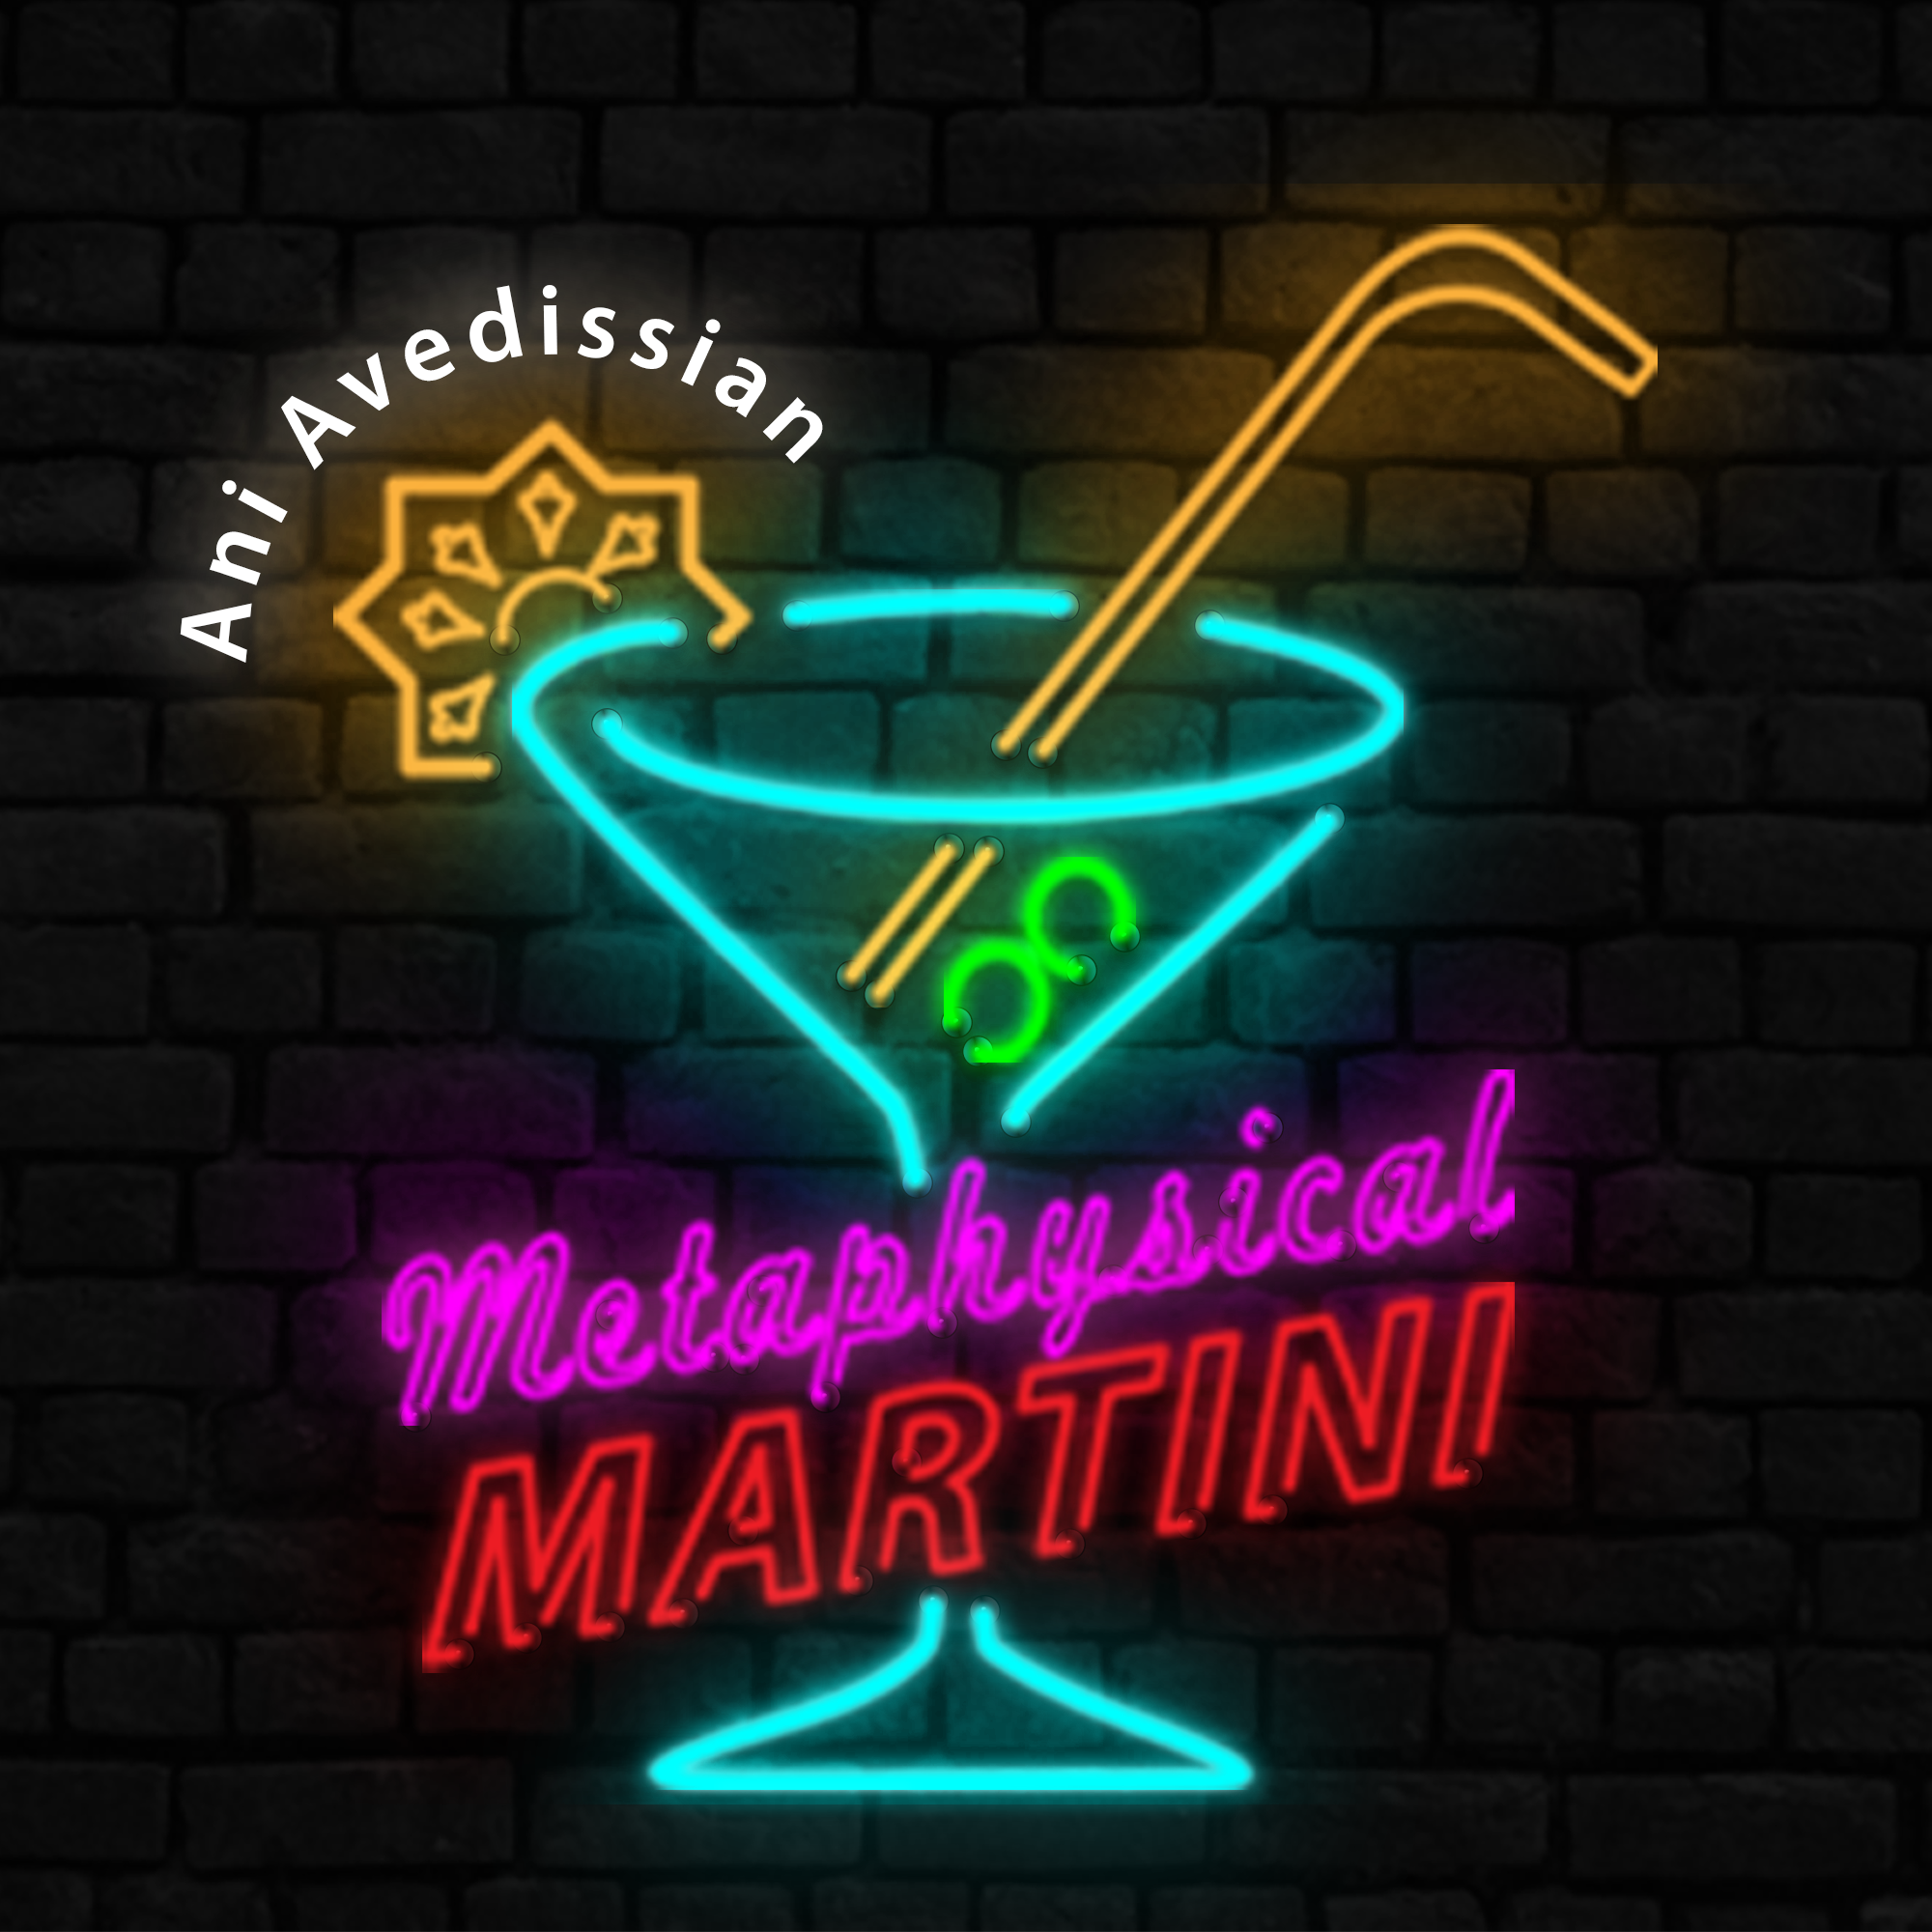 "Metaphysical Martini" 03/17/2021 Civil Wars?  Revolving Doors?  This seer needs a nice cold beer!